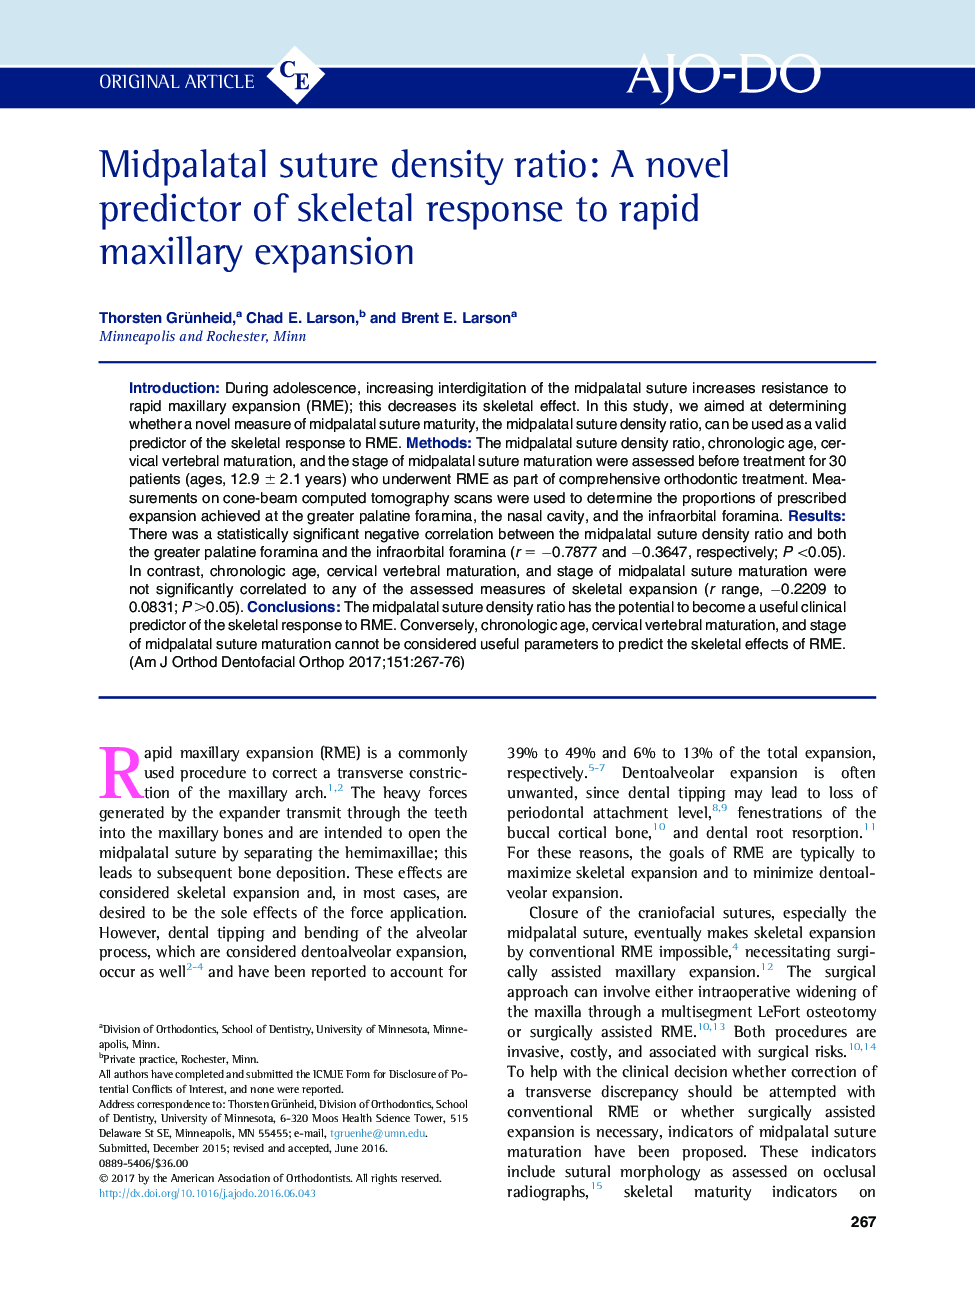 Midpalatal suture density ratio: A novel predictor of skeletal response to rapid maxillary expansion